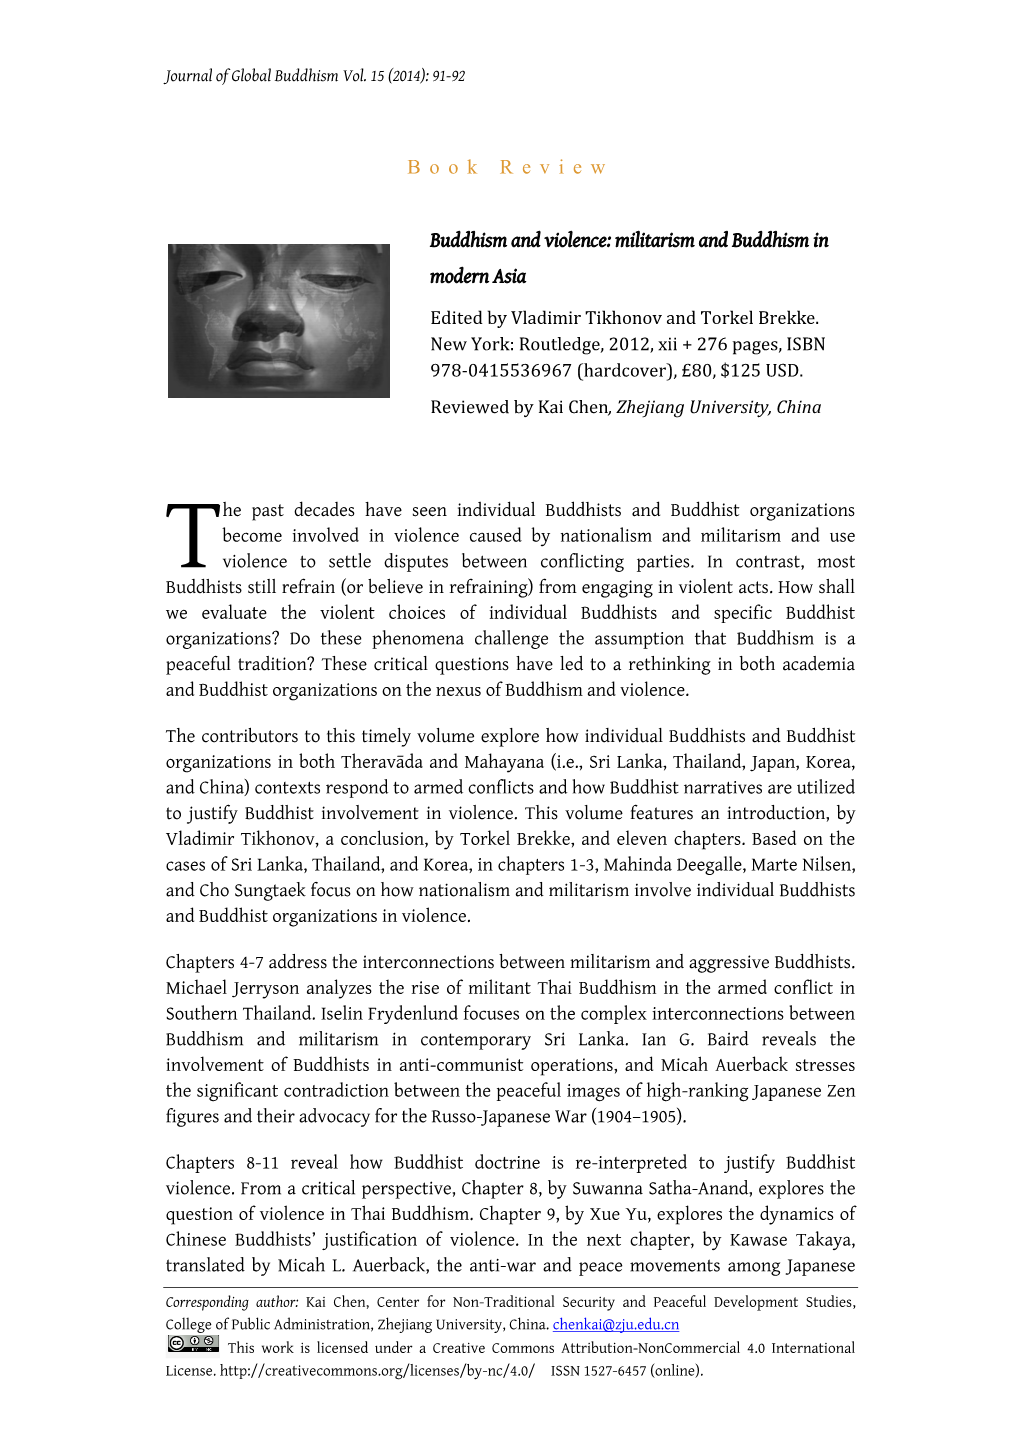 Review of Buddhism and Violence